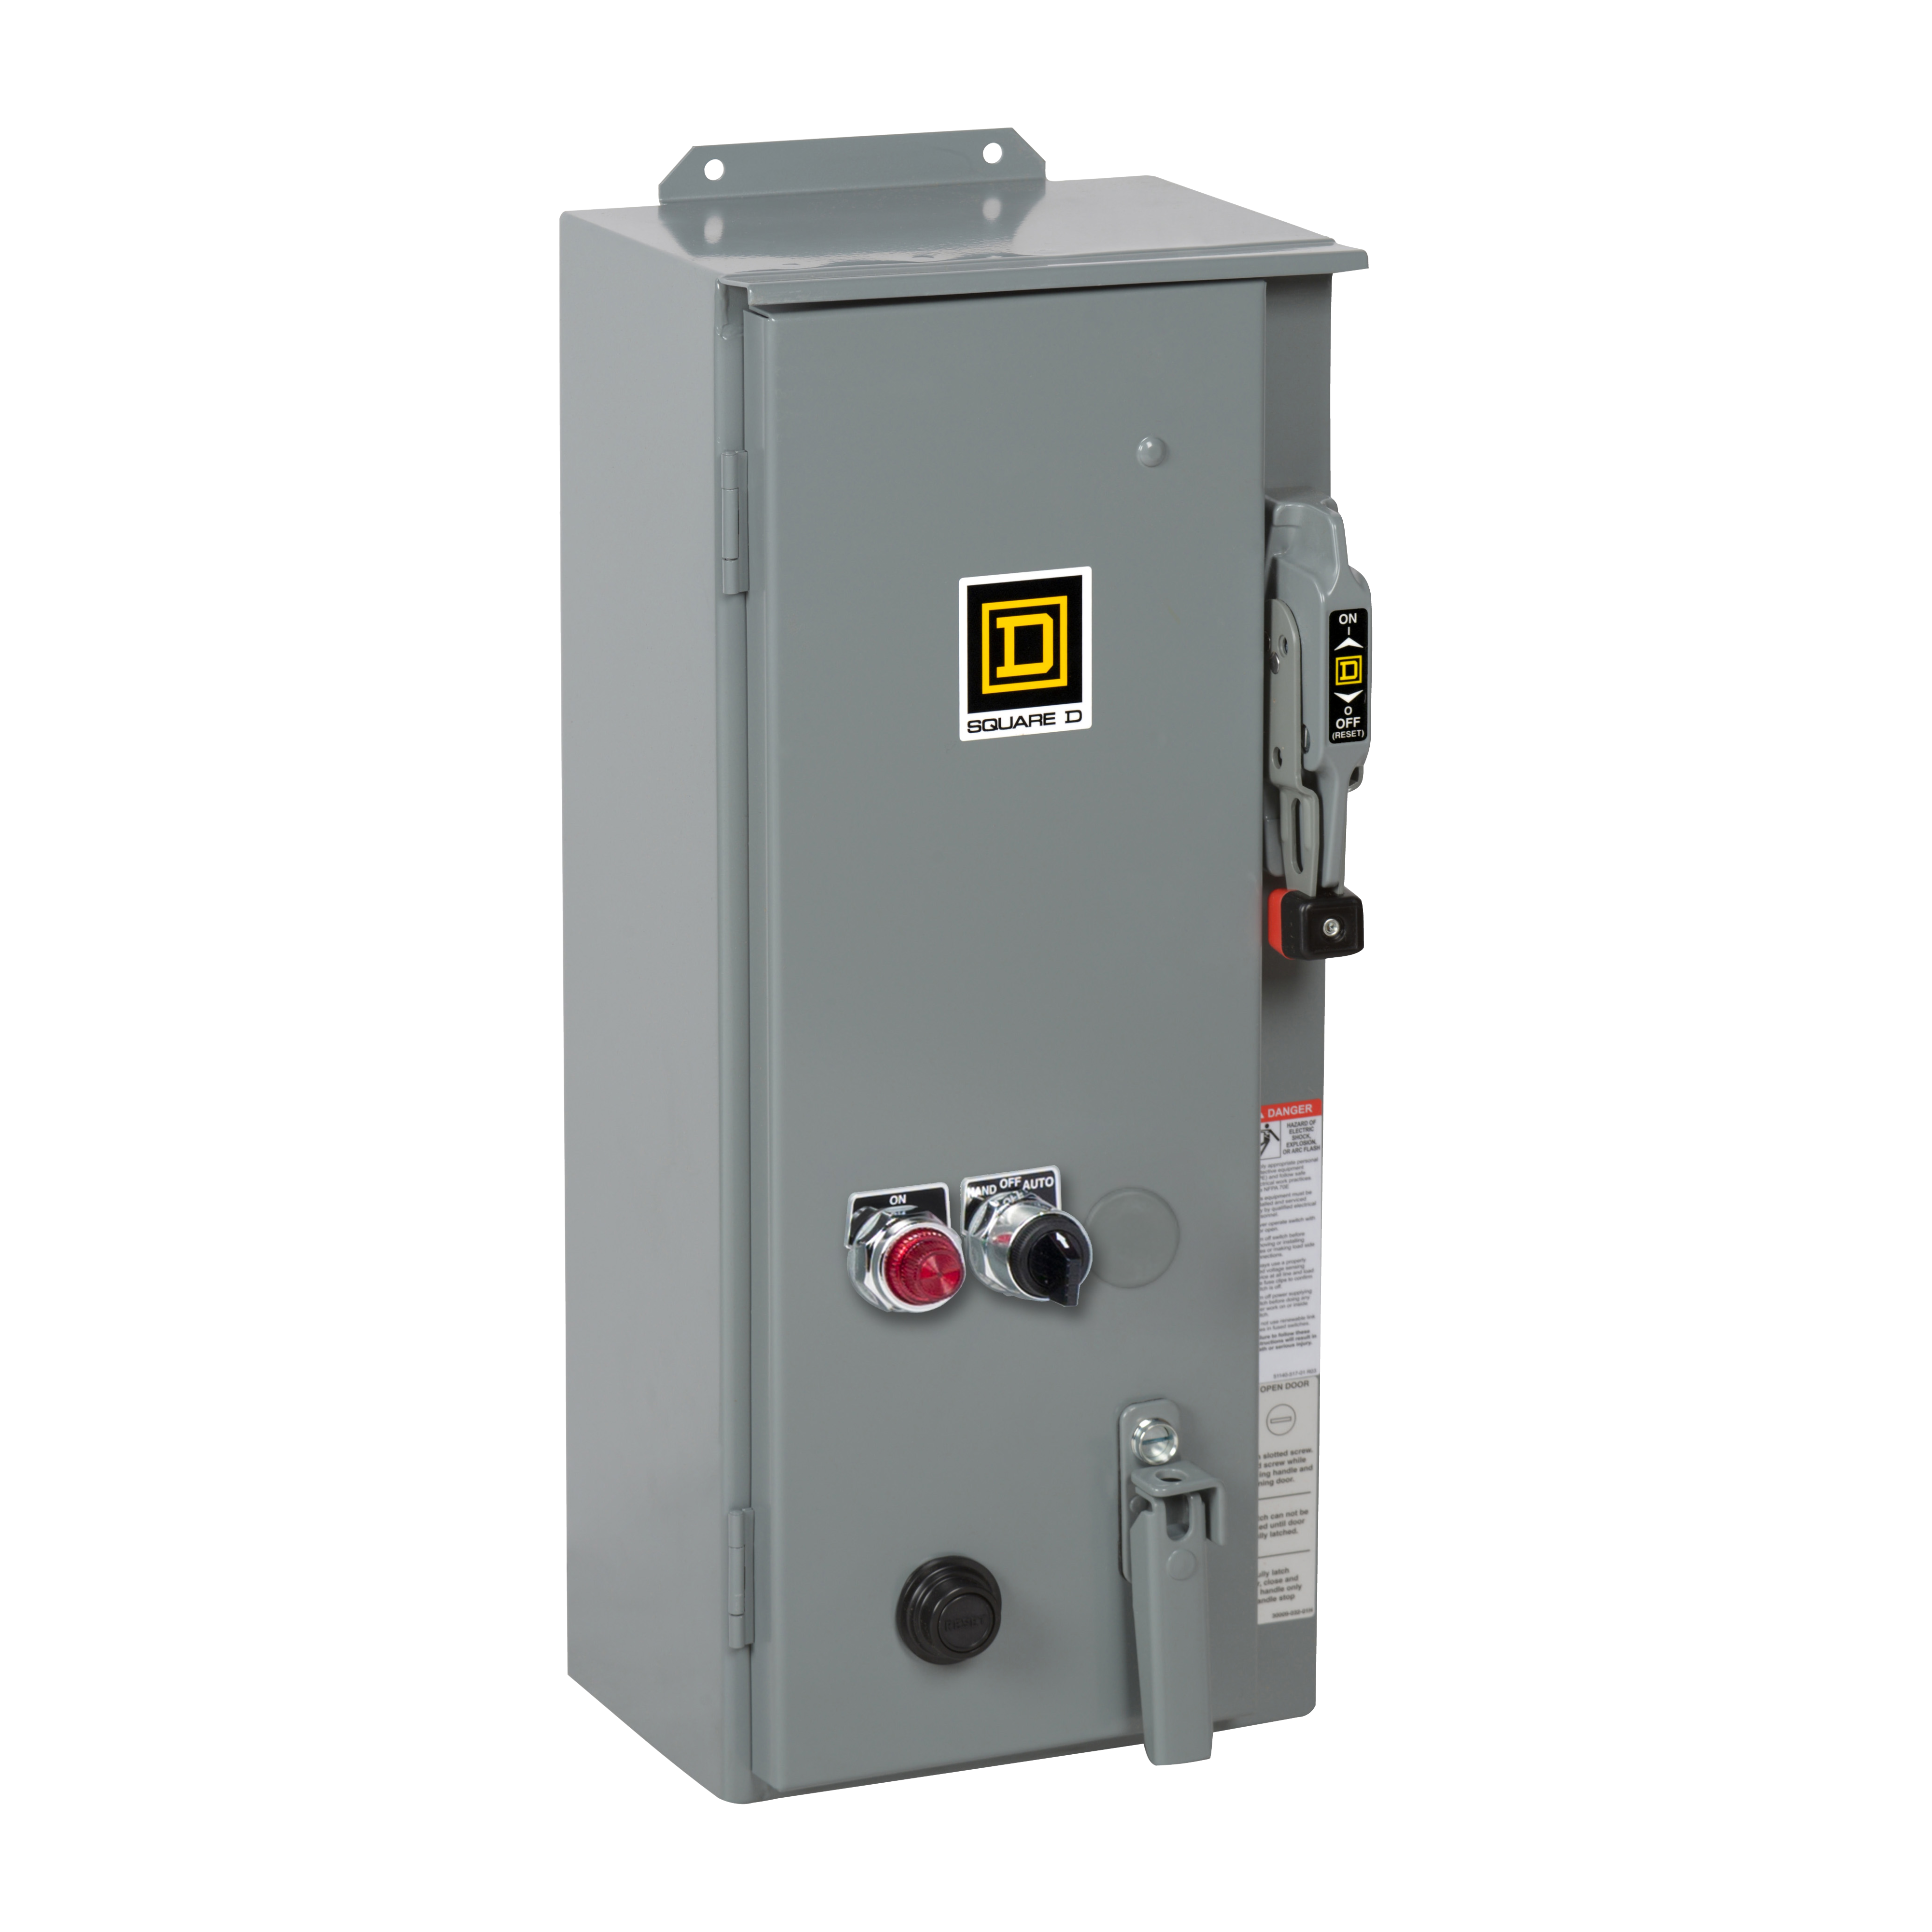 NEMA Combination Starter, Type S, 30A fusible disconnect, Size 0, 18A, 5 HP at 600 VAC polyphase, 120 VAC coil, NEMA 12